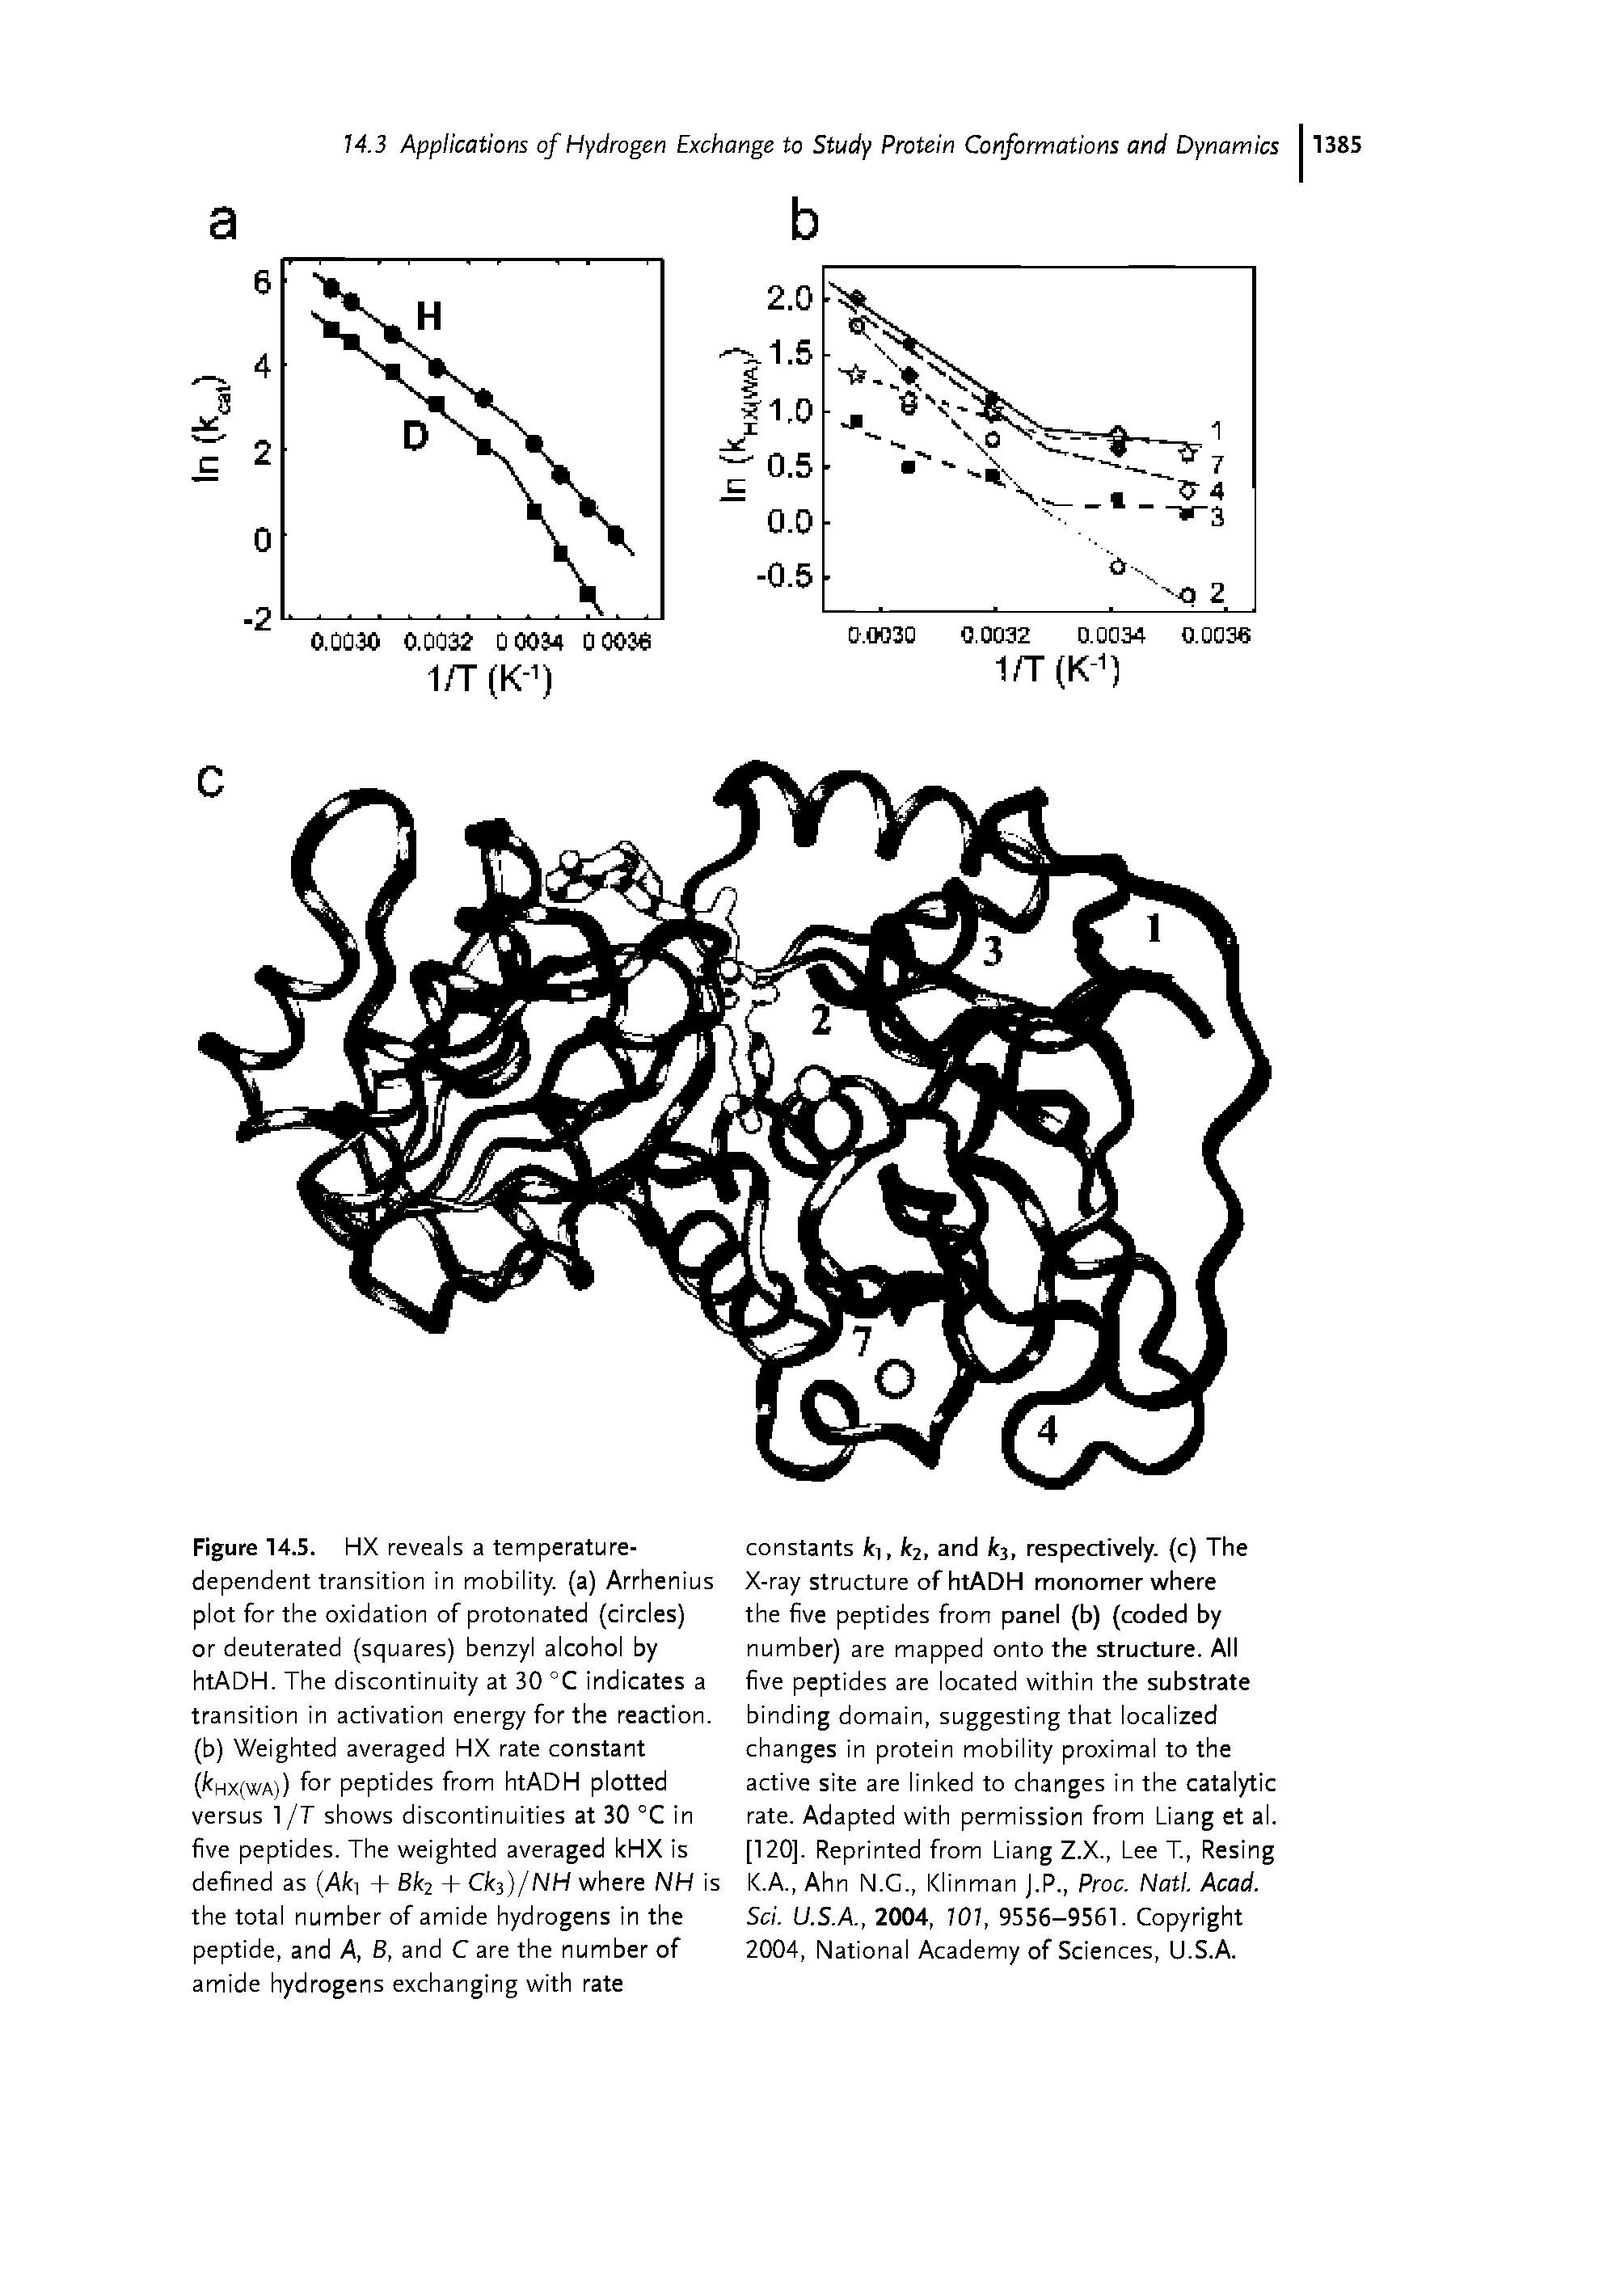 Figure 14.5. HX reveals a temperature-dependent transition in mobility, (a) Arrhenius plot for the oxidation of protonated (circles) or deuterated (squares) benzyl alcohol by htADH. The discontinuity at 30 °C indicates a transition in activation energy for the reaction, (b) Weighted averaged HX rate constant ( HX(wA)) fot peptides from htADH plotted versus 1 /T show/s discontinuities at 30 °C in five peptides. The w/eighted averaged kHX is defined as (A(ti + 6(t2 + Ck )/NH where NH is the total number of amide hydrogens in the peptide, and A, B, and C are the number of amide hydrogens exchanging with rate...